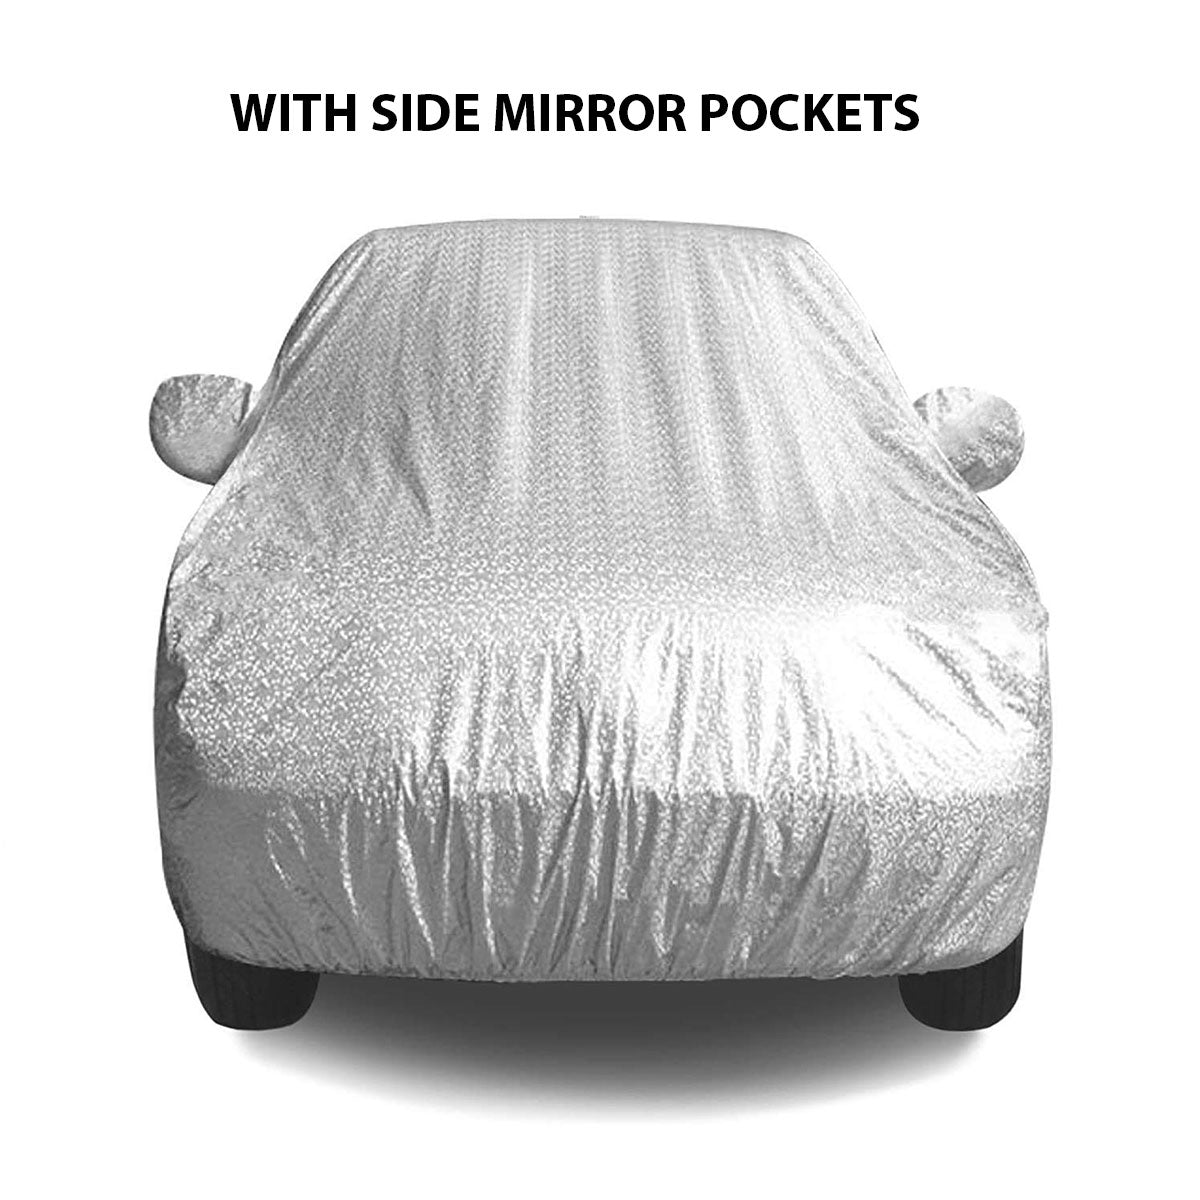 Oshotto Spyro Silver Anti Reflective, dustproof and Water Proof Car Body Cover with Mirror Pockets For Nissan Kicks